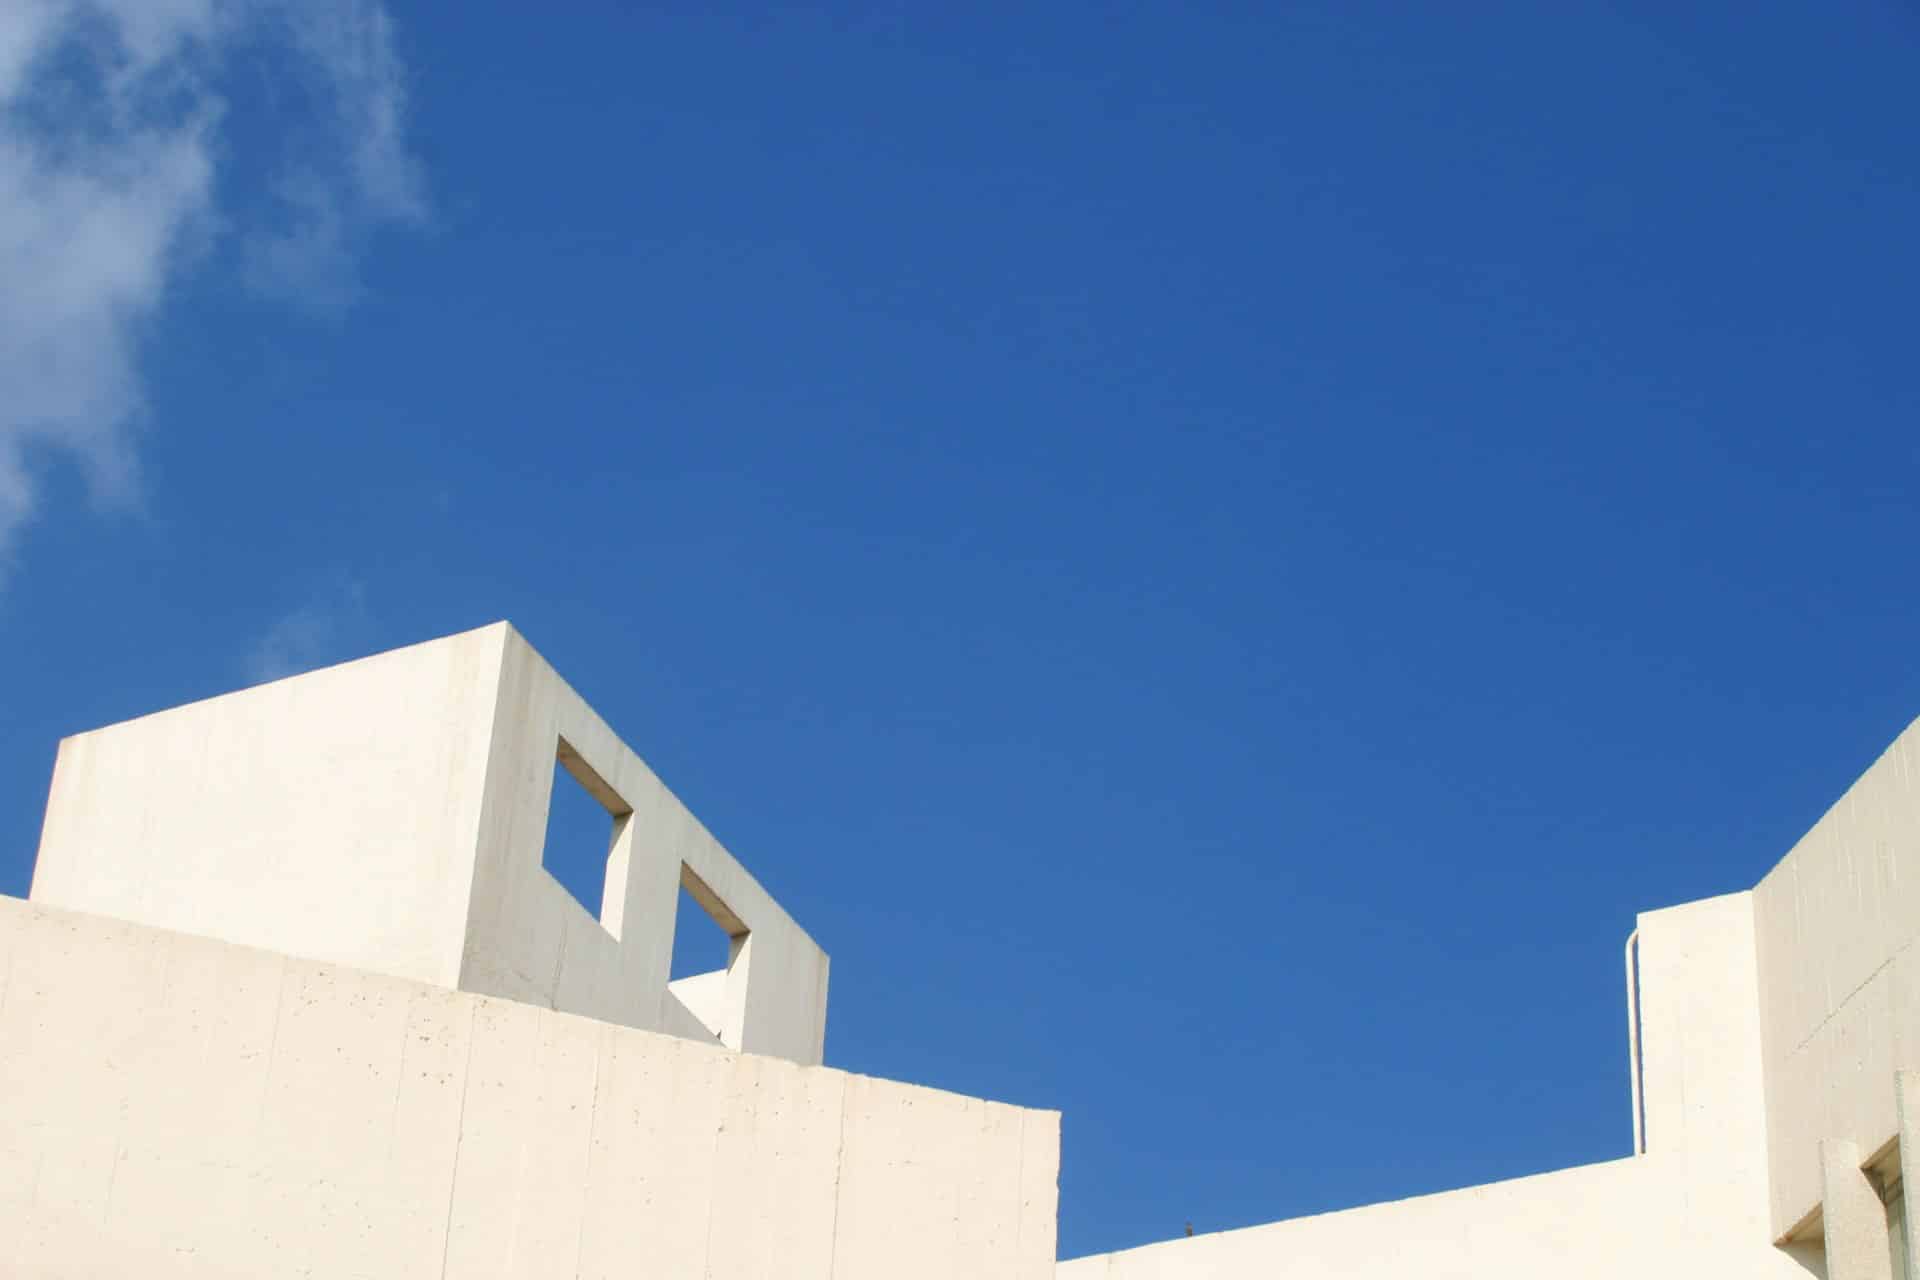 The Joan Miró Foundation is one of many museums sitting around the hill of Montjuïc.